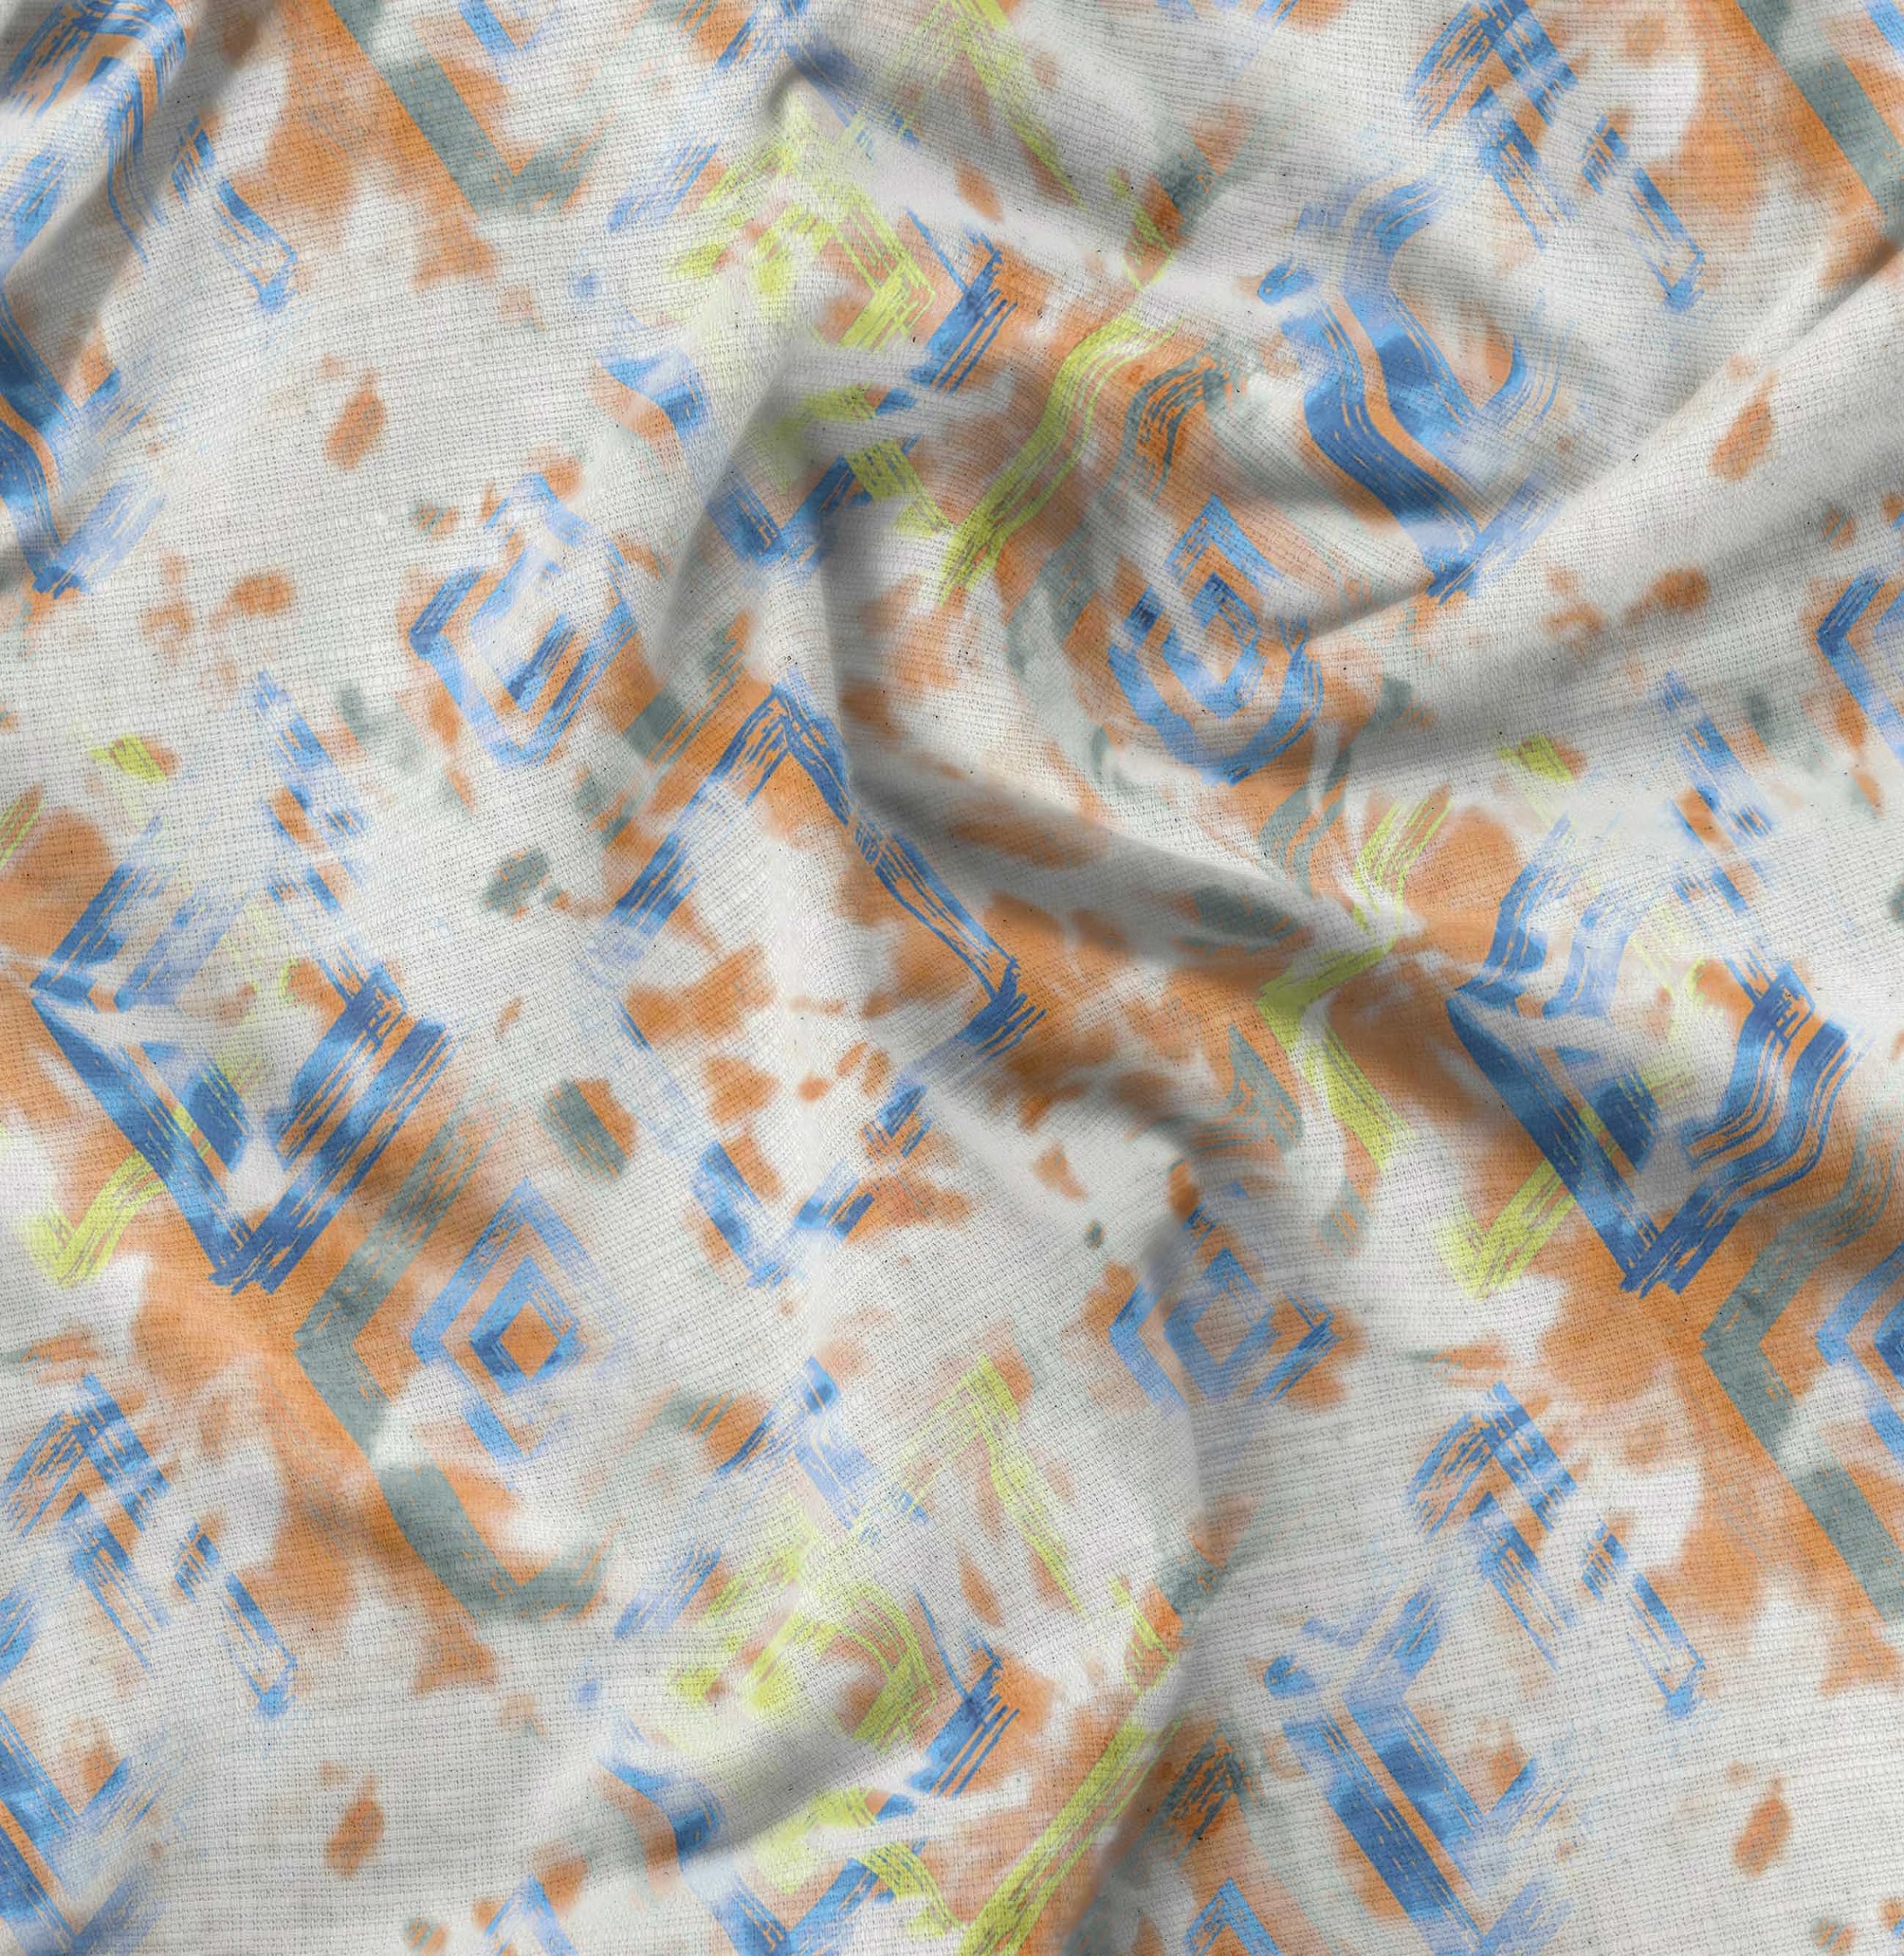 Soimoi Floral Print, Cotton Cambric, Quilting Fabric Sold by The Yard 42 Inch Wide, Medium Weight Cotton Fabric, Sewing Supplies,White & Orange